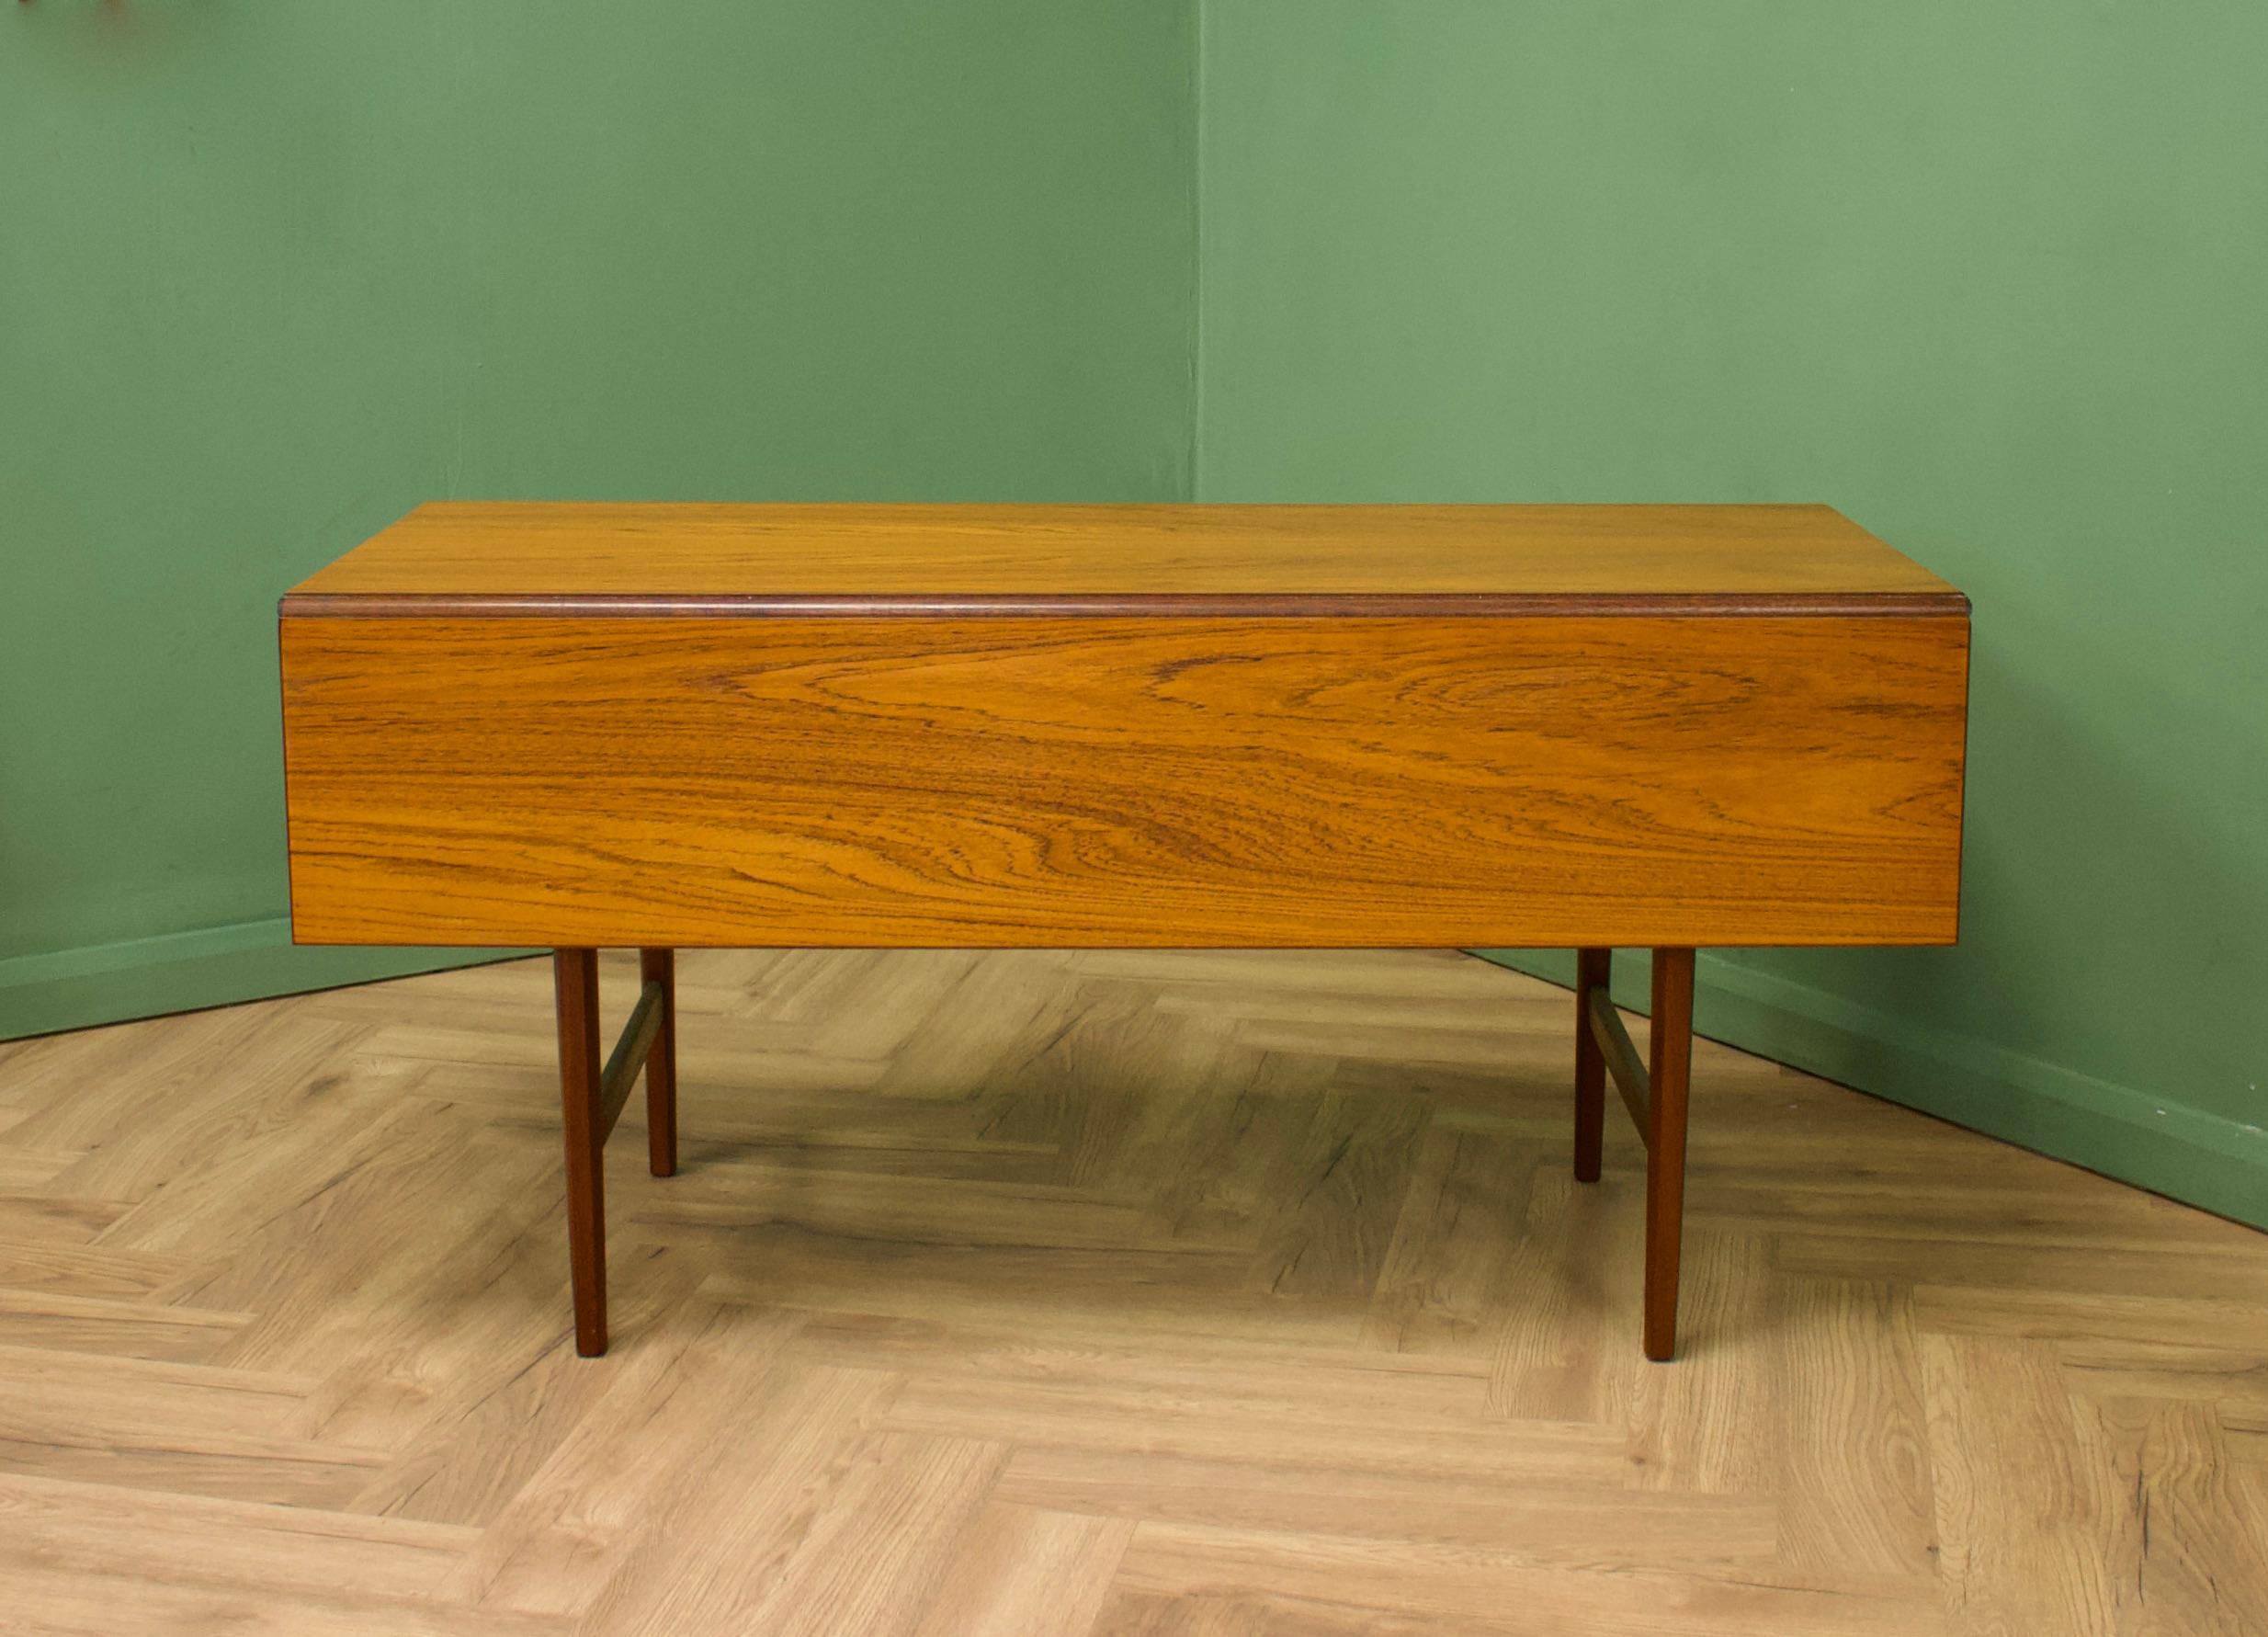 A teak fold down dining table made by Bath Cabinet Makers, circa 1960s
This table has a great space saving design

Extended depth 92 cm